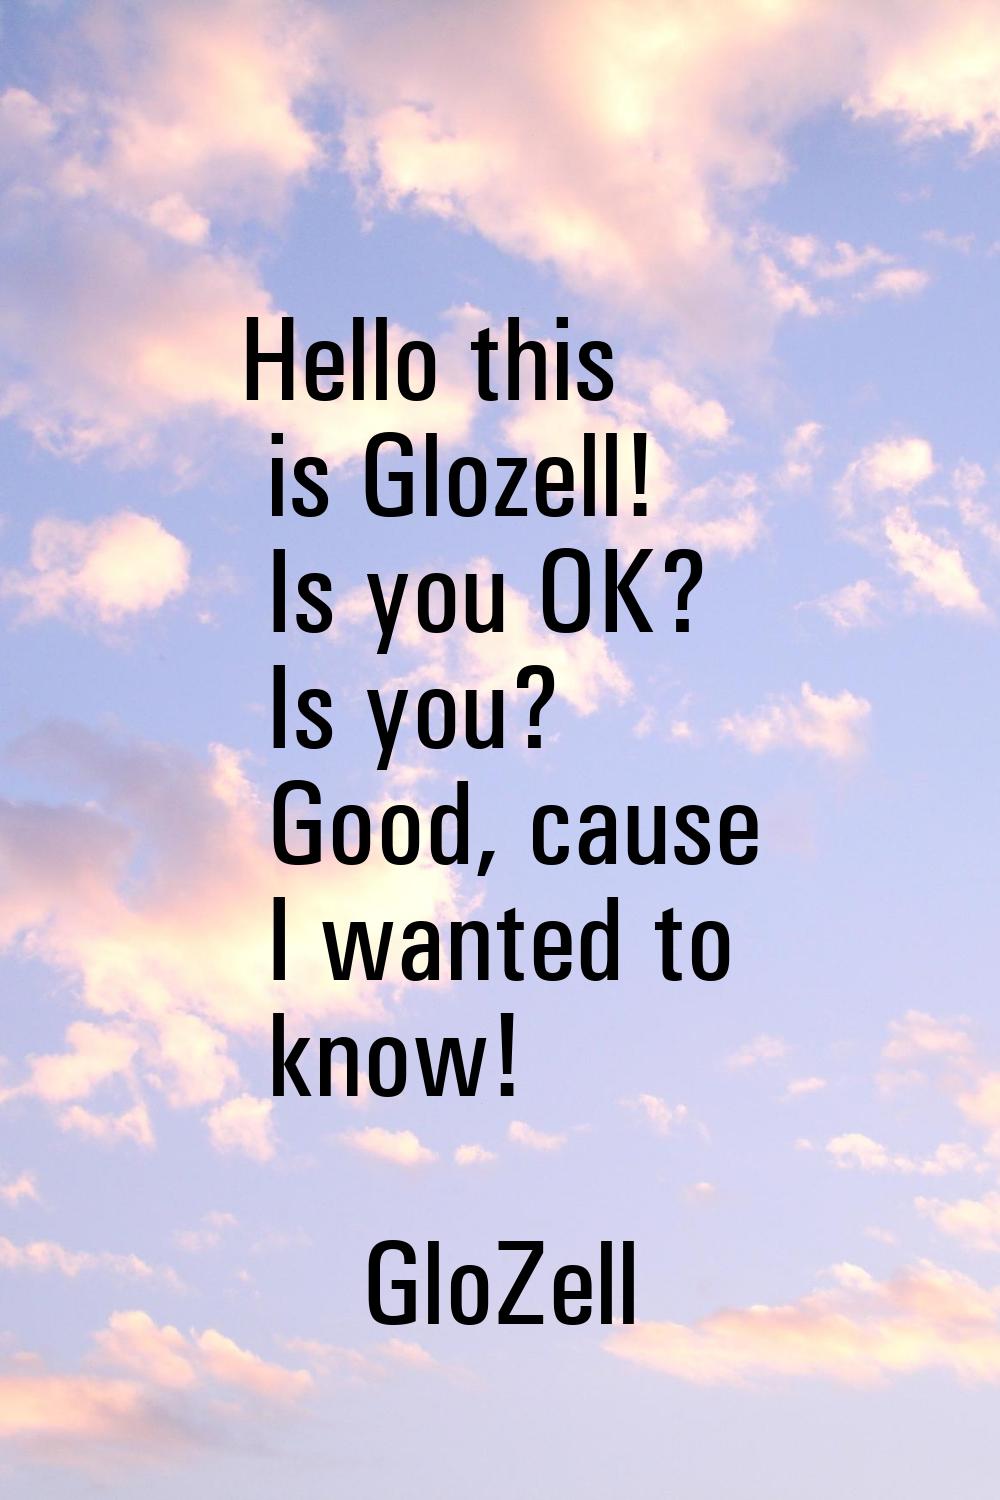 Hello this is Glozell! Is you OK? Is you? Good, cause I wanted to know!